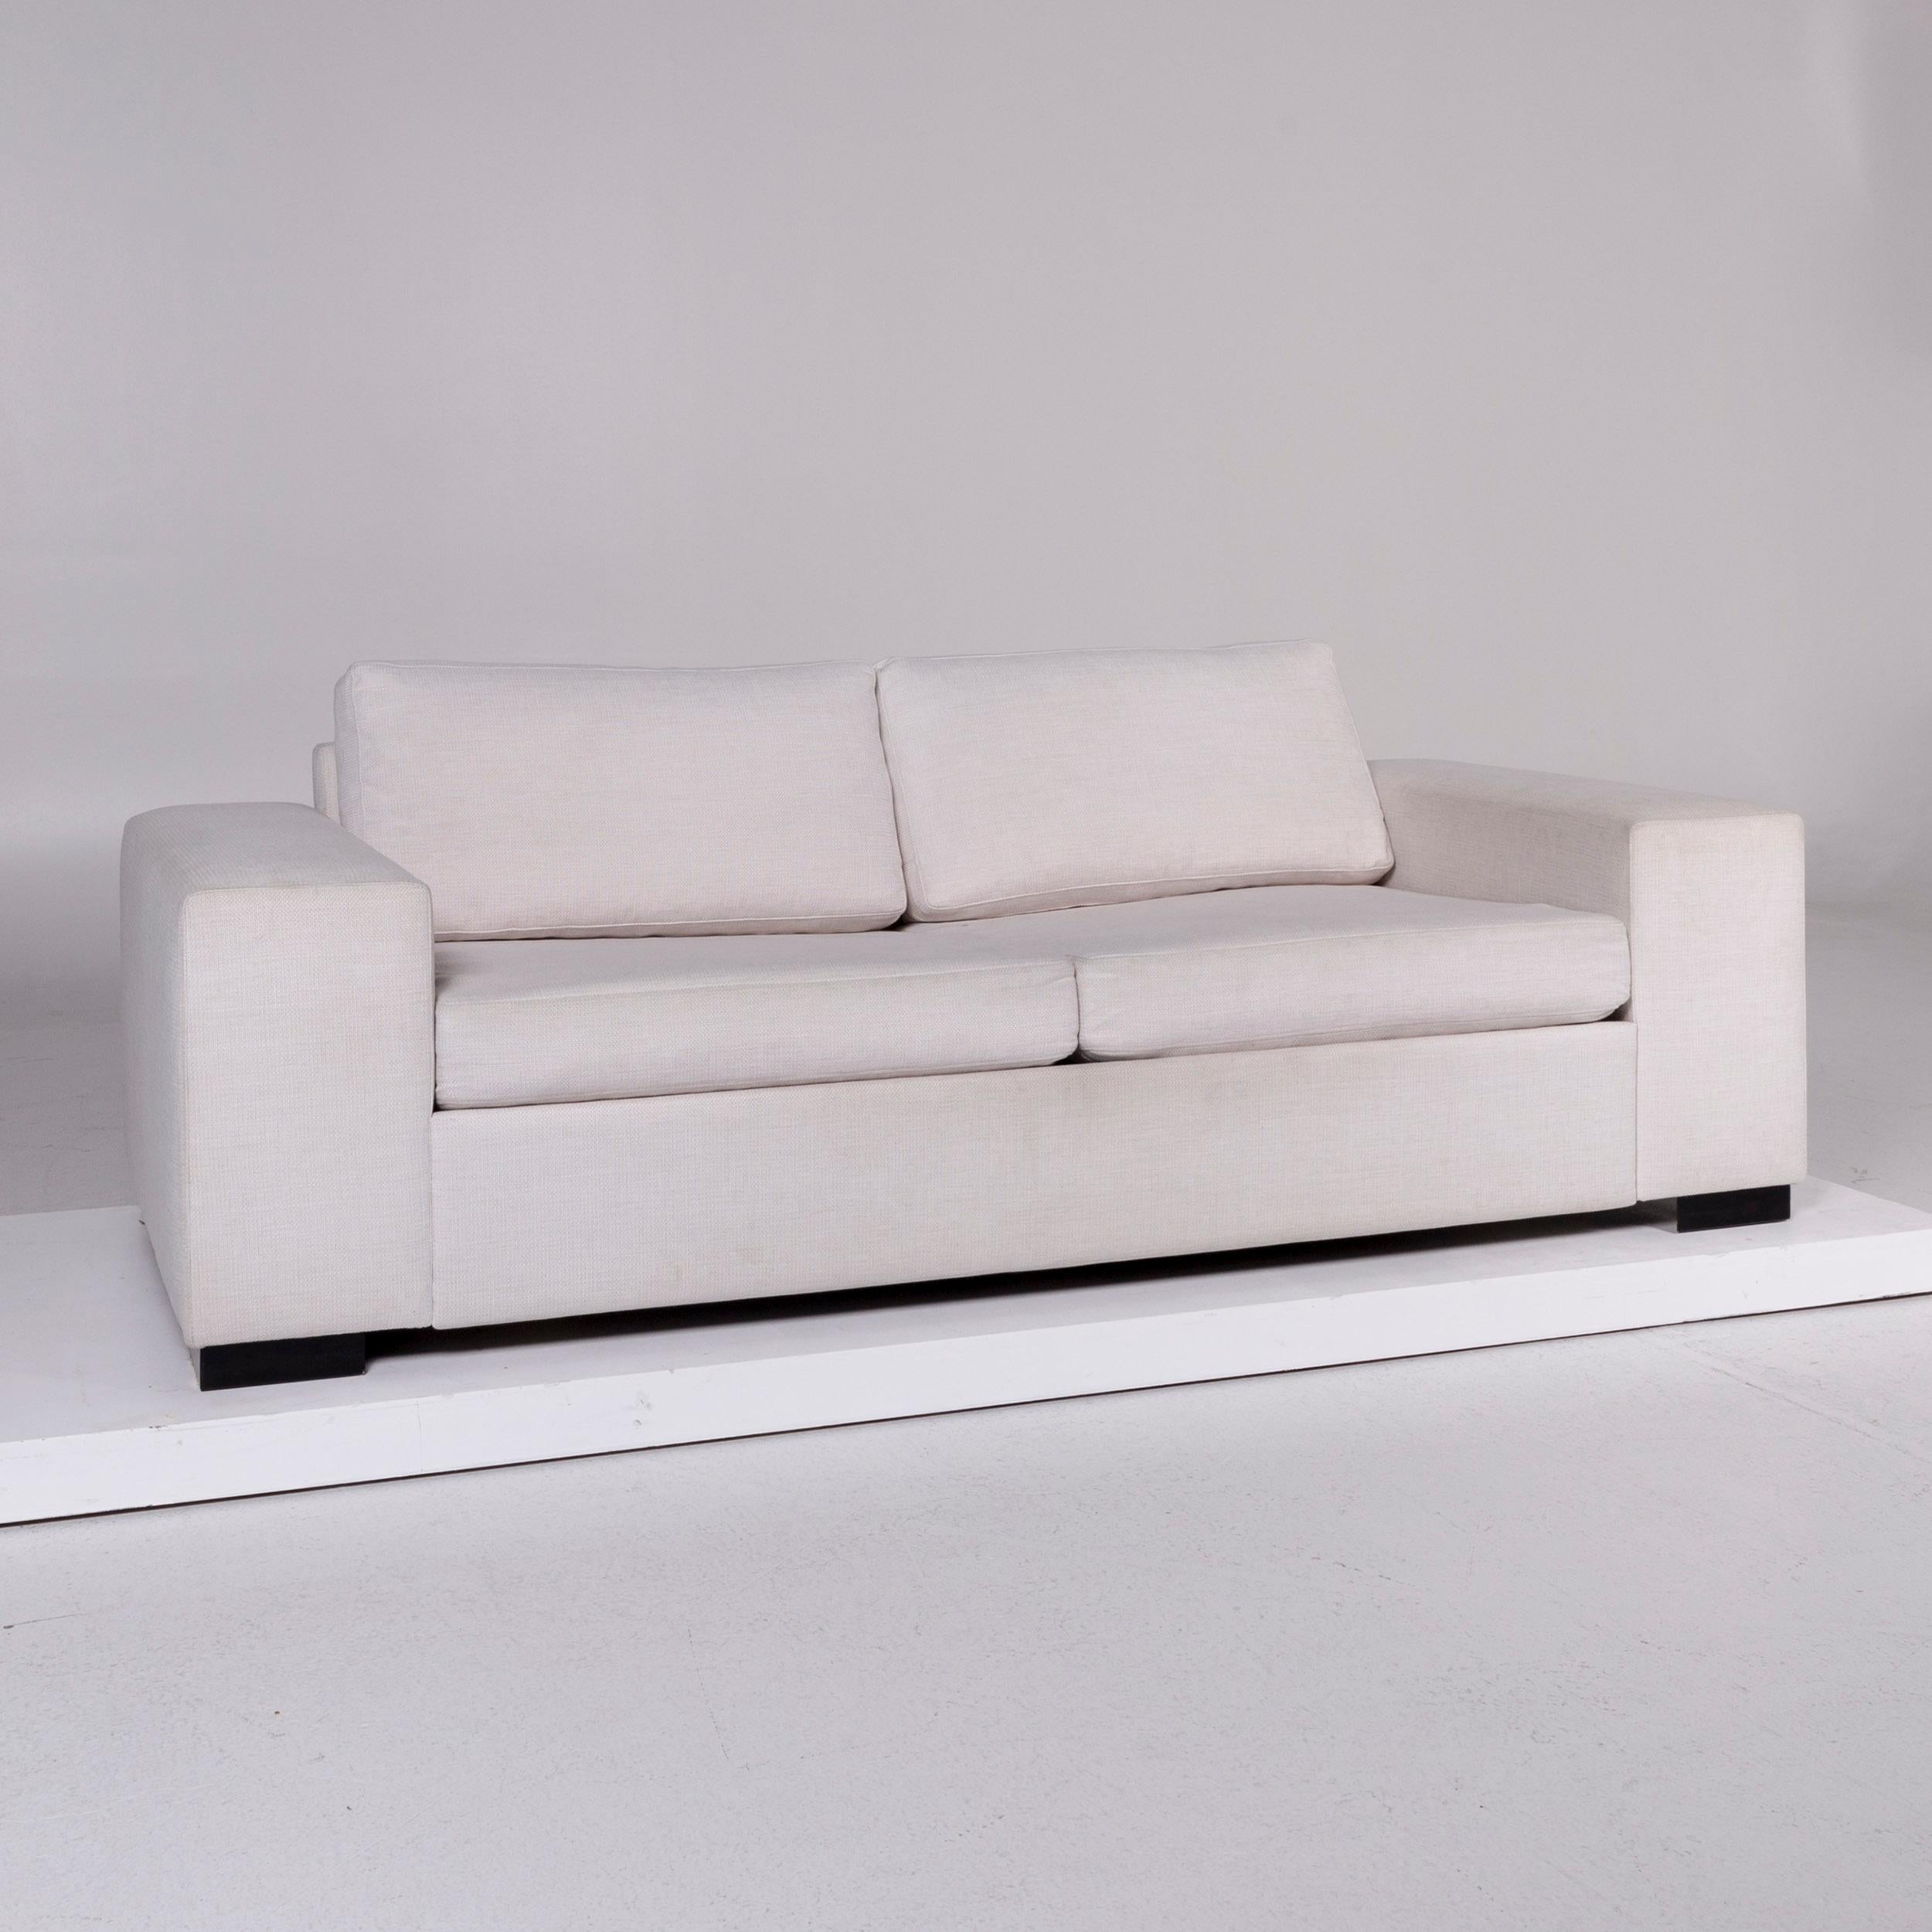 We bring to you a BoConcept Terni fabric sofa bed cream white cream sleep function incl. mattress.
 
Product measurements in centimetres:
 
Depth 90
Width 206
Height 75
Seat-height 42
Rest-height 55
Seat-depth 54
Seat-width